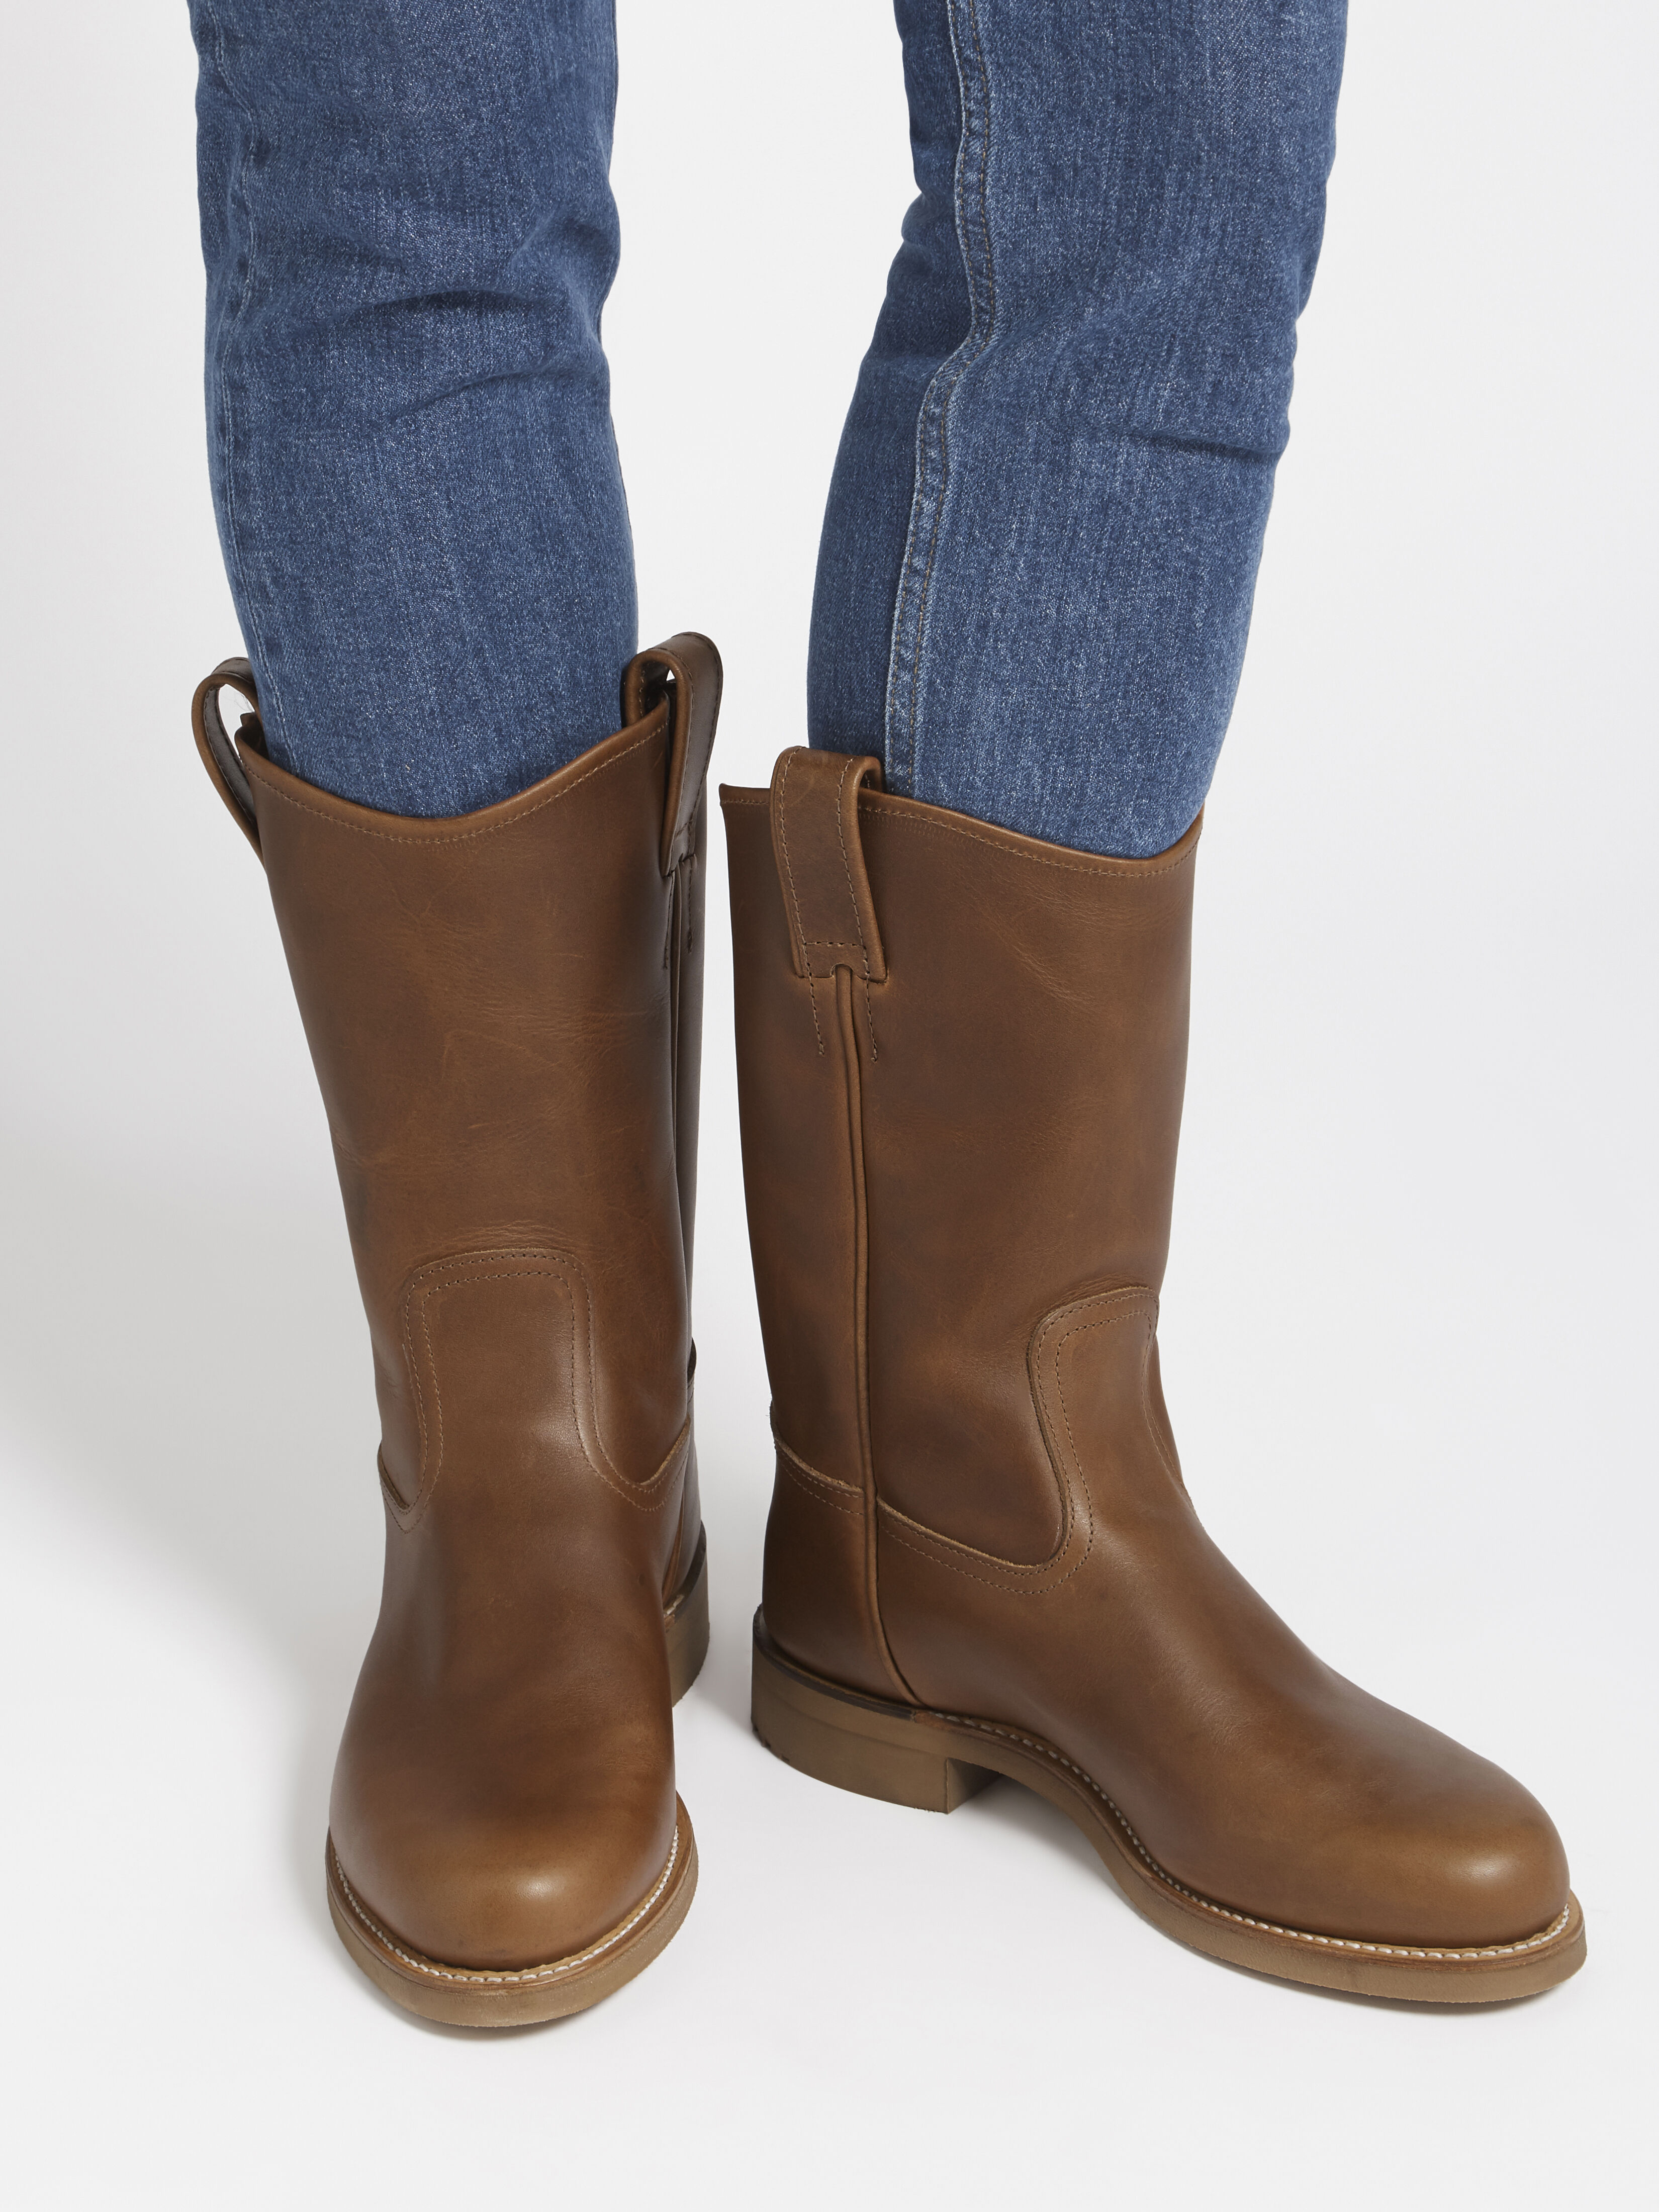 rm williams knee high boots